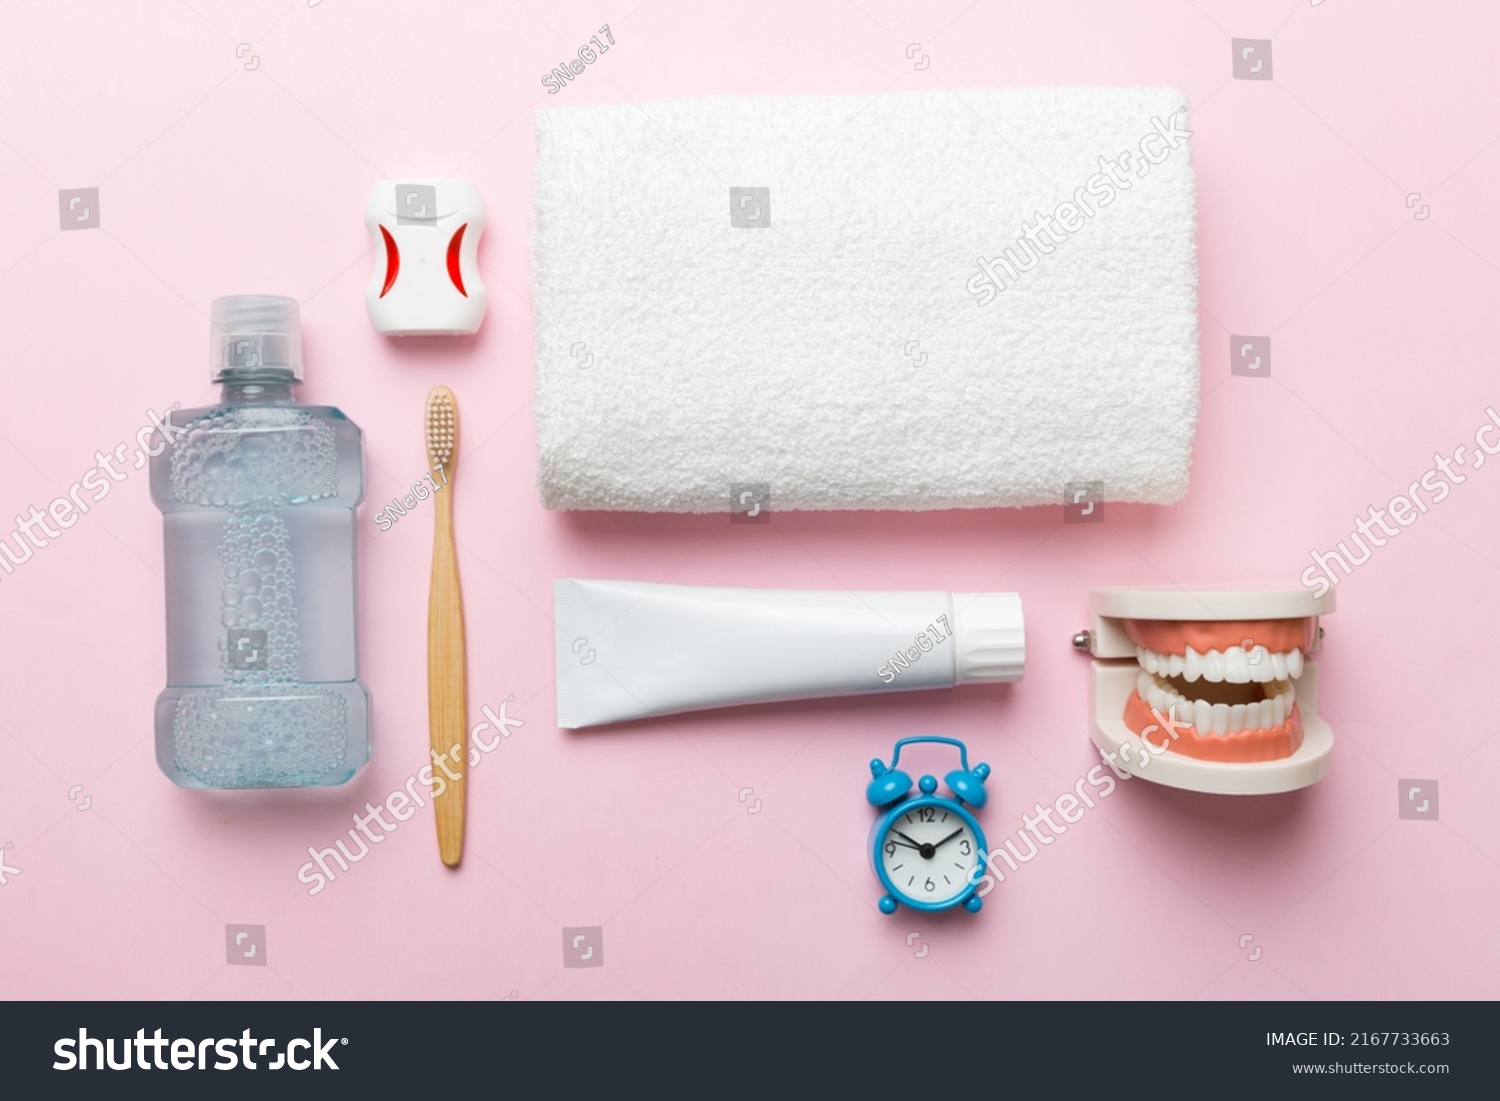 Mouthwash and other oral hygiene products on colored table top view with copy space. Flat lay. Dental hygiene. Oral care kit. Dentist concept. #2167733663